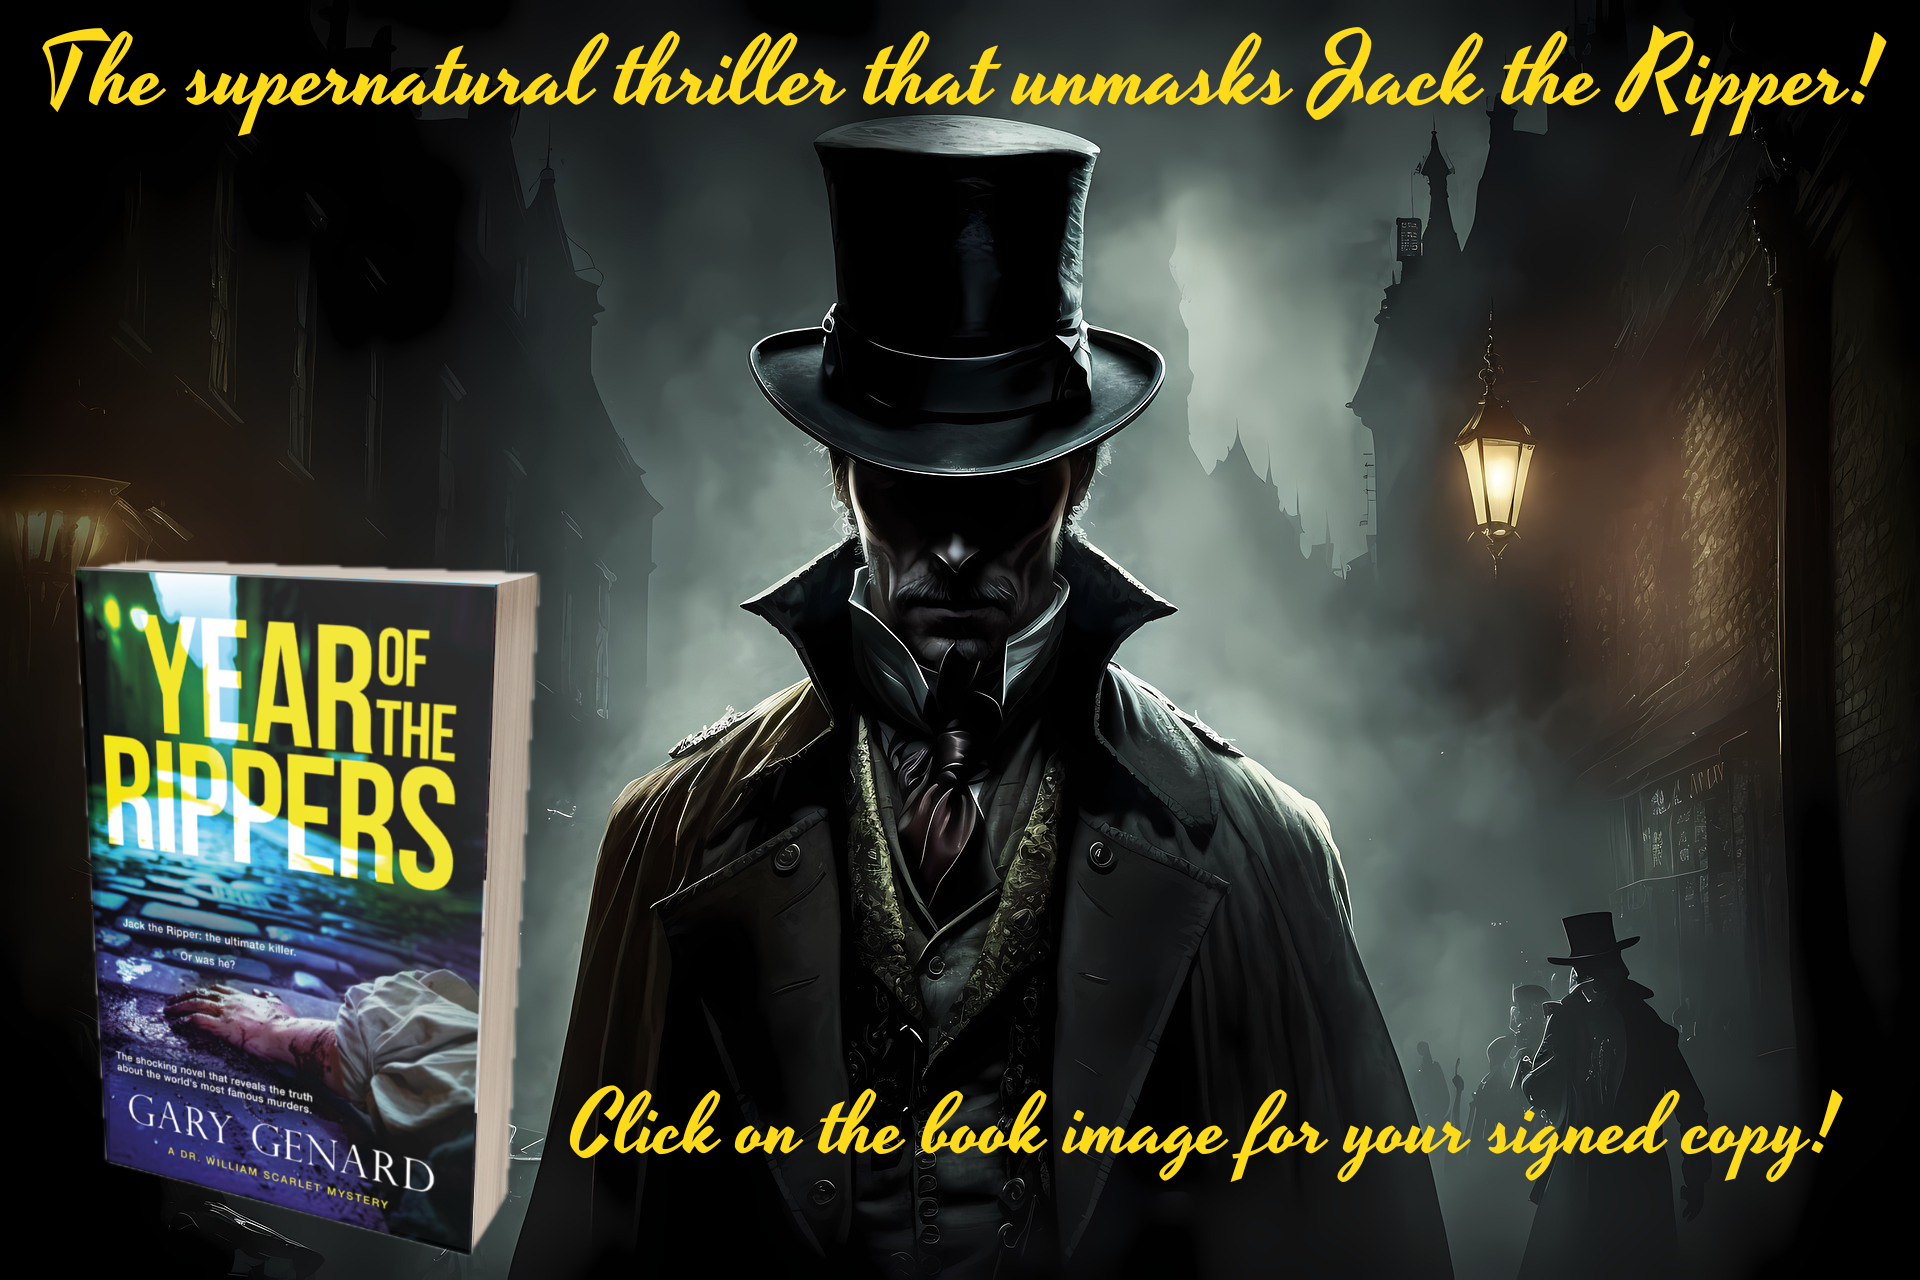 Year of the Rippers, by Gary Genard - The supernatural thriller that unmasks Jack the Ripper!